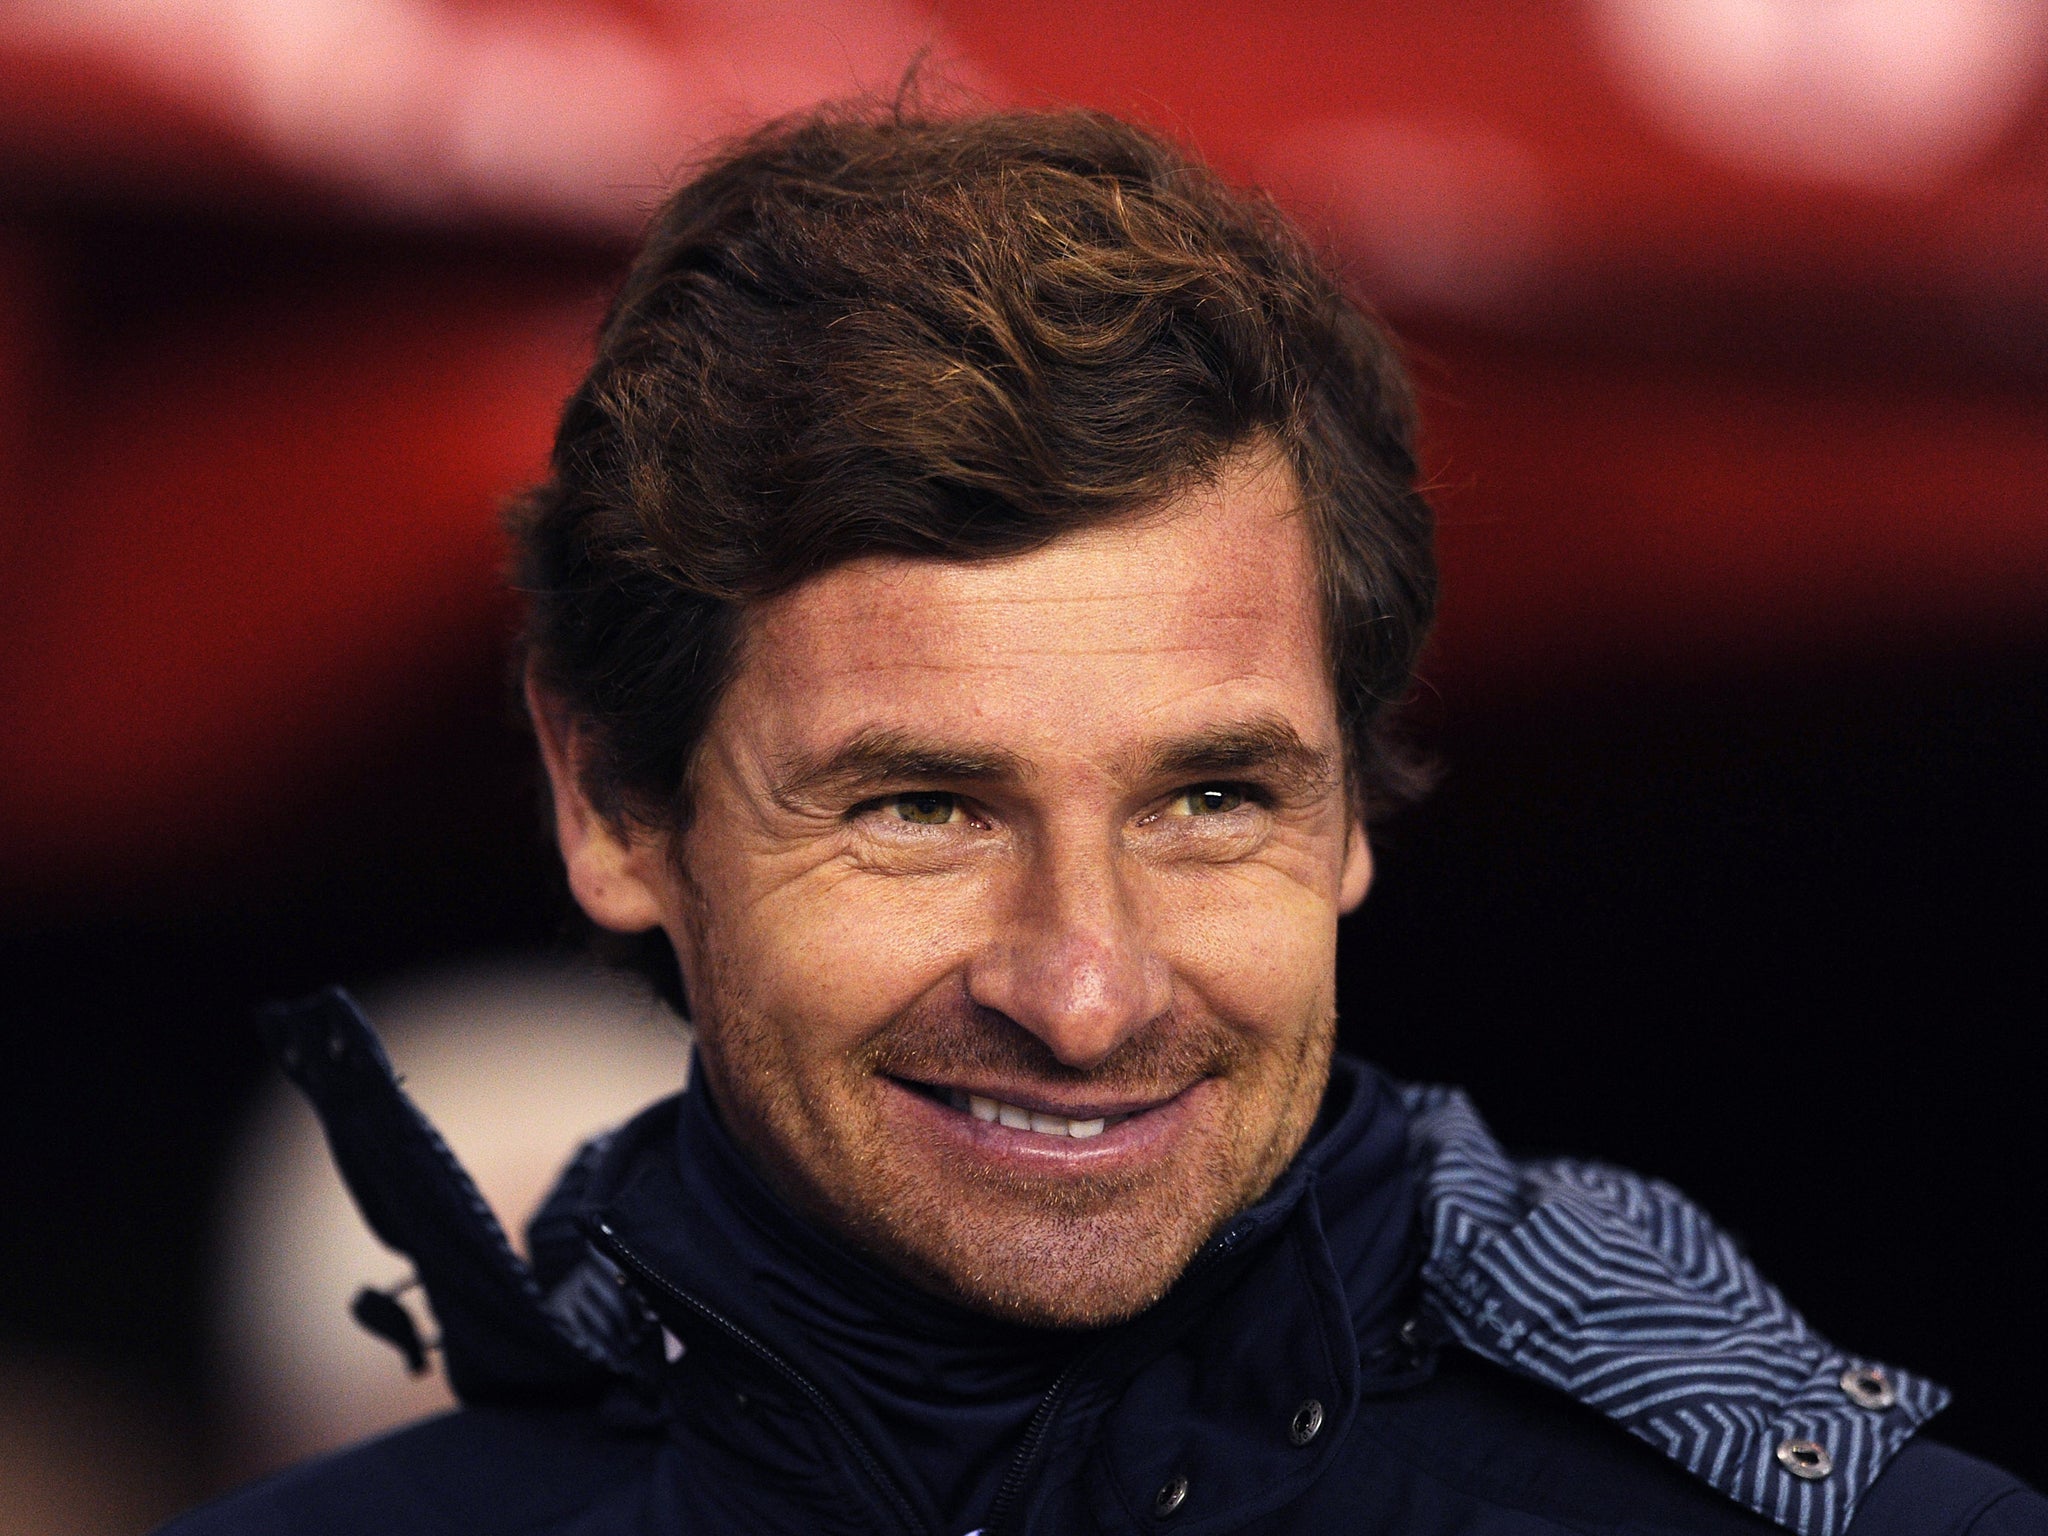 Tottenham manager Andre Villas-Boas wants to finish the Europa League Group Stages with six wins from six as they take on Anzhi Makhachkala